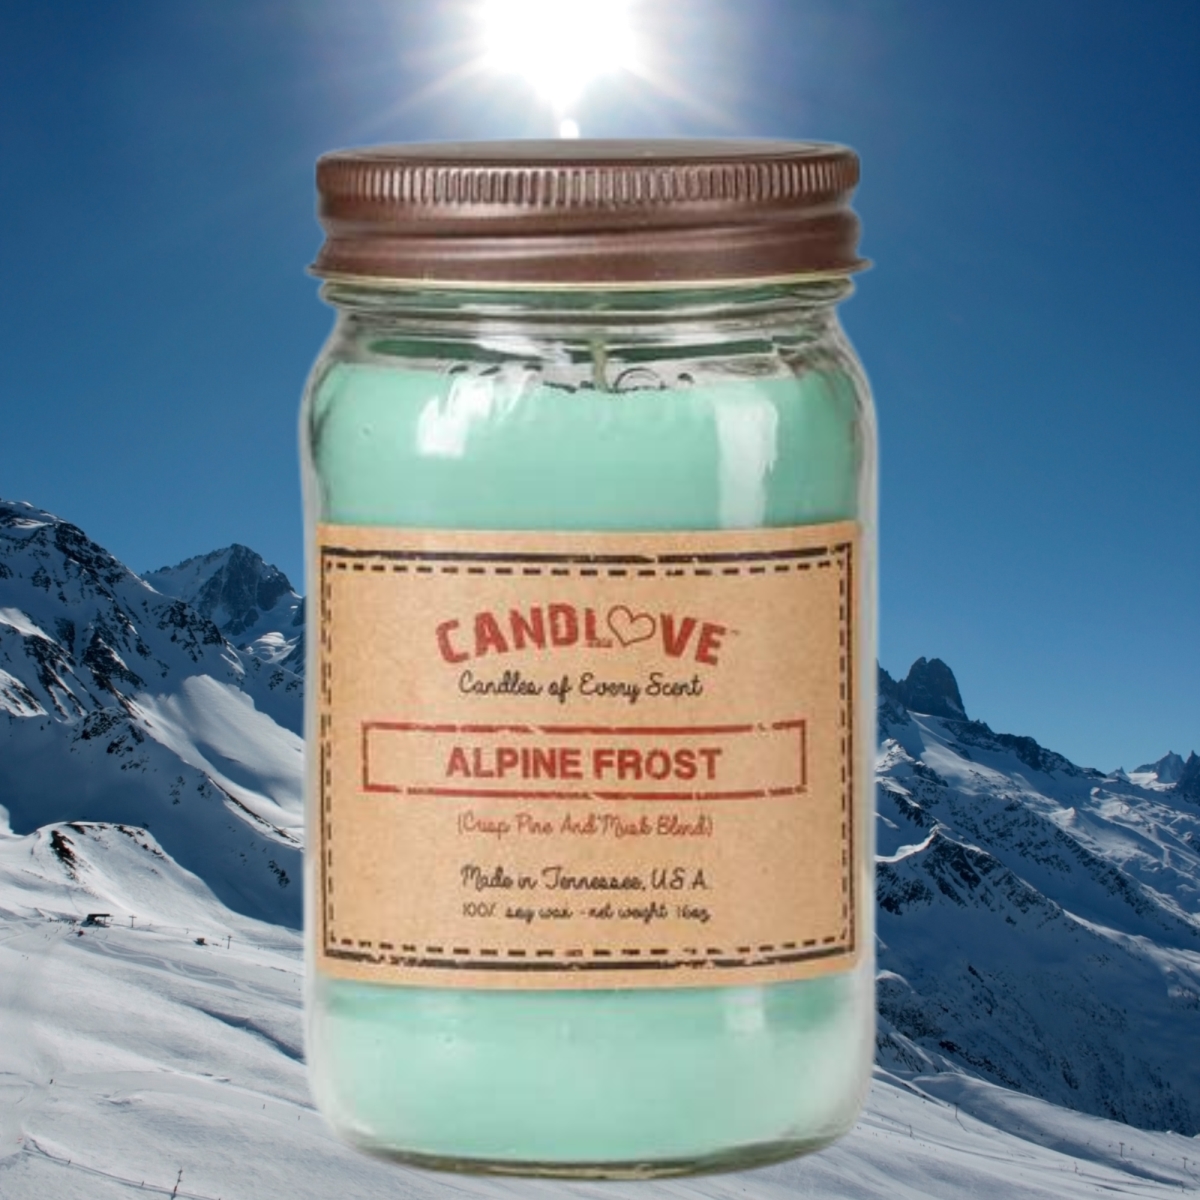 Picture of PPI SUPPLIES Alpine- F-C Candlove Alpine Frost Scented Candle - Non-Toxic 100% Soy Candle - Handmade & Hand Poured Long Burning Candle - Highly Scented All Natural Clean Burning Candle (16 OZ Mason Jar) Made in The USA